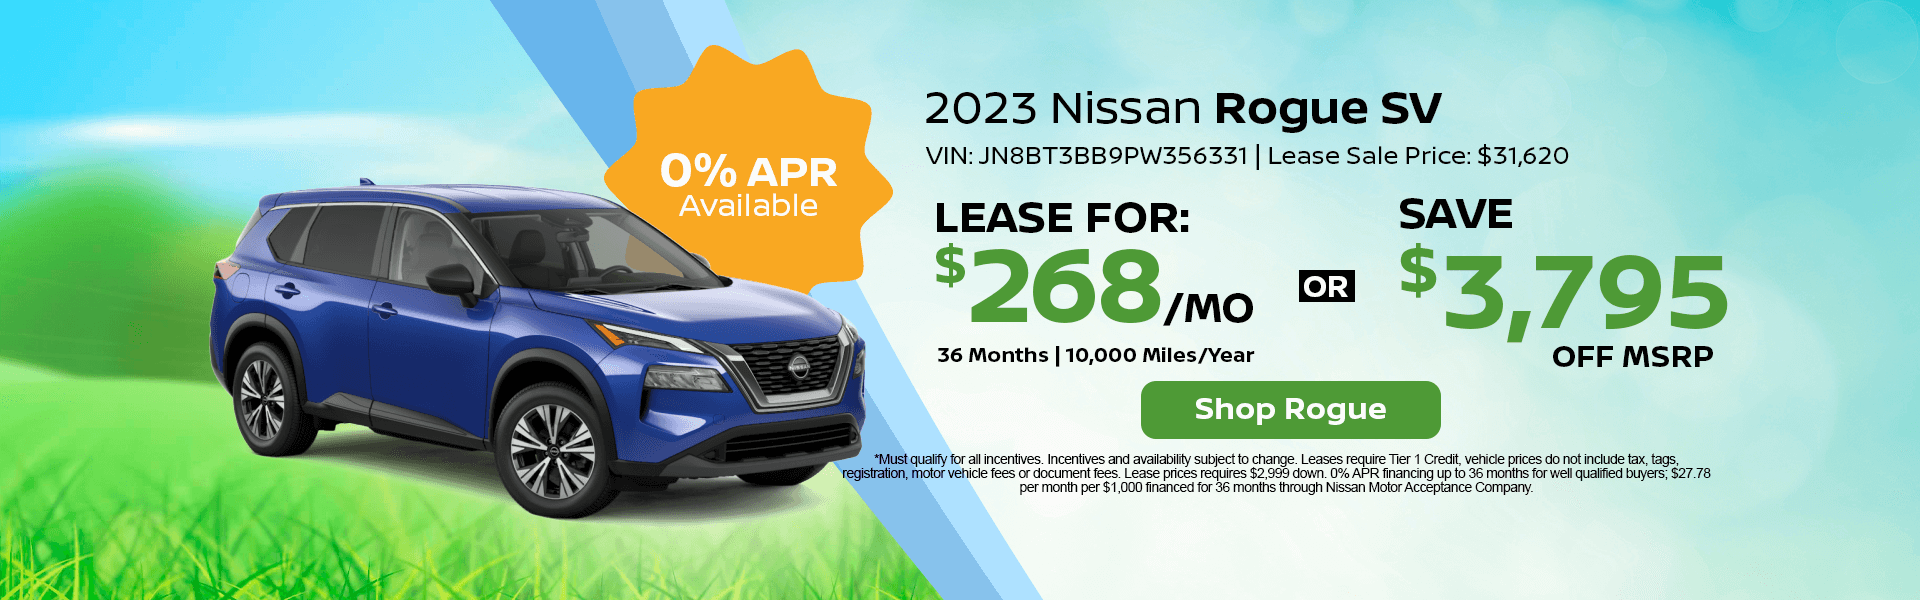 Nissan Rogue Special Offer Norwell, MA